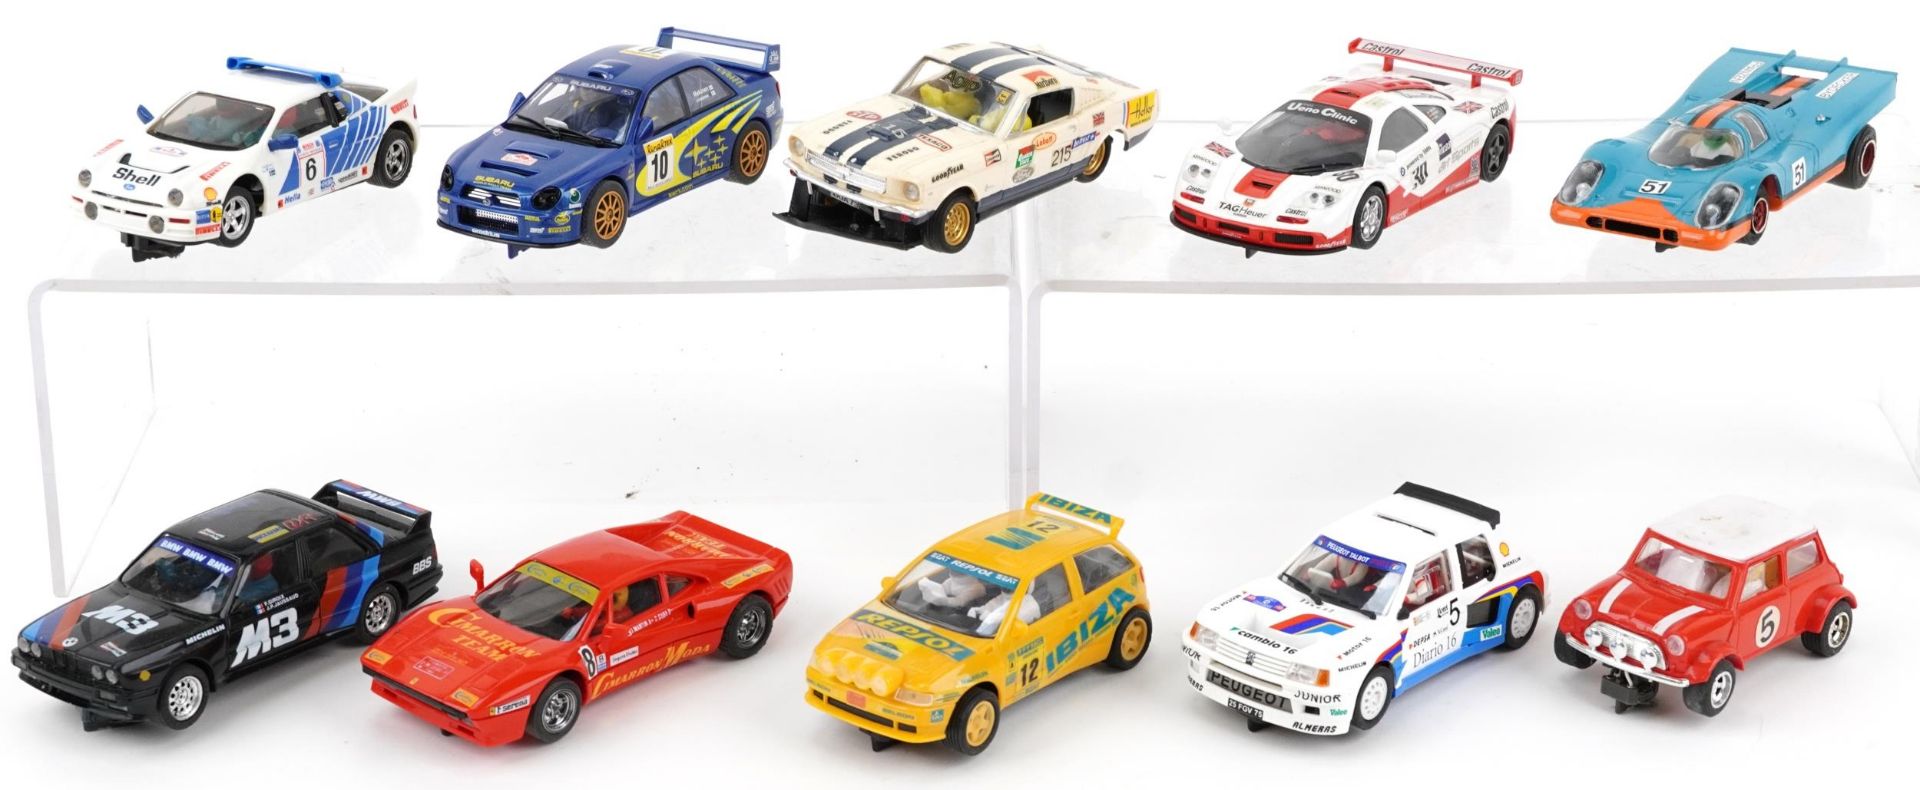 Ten vintage and later slot cars including Scalextric, Hornby and Ninco